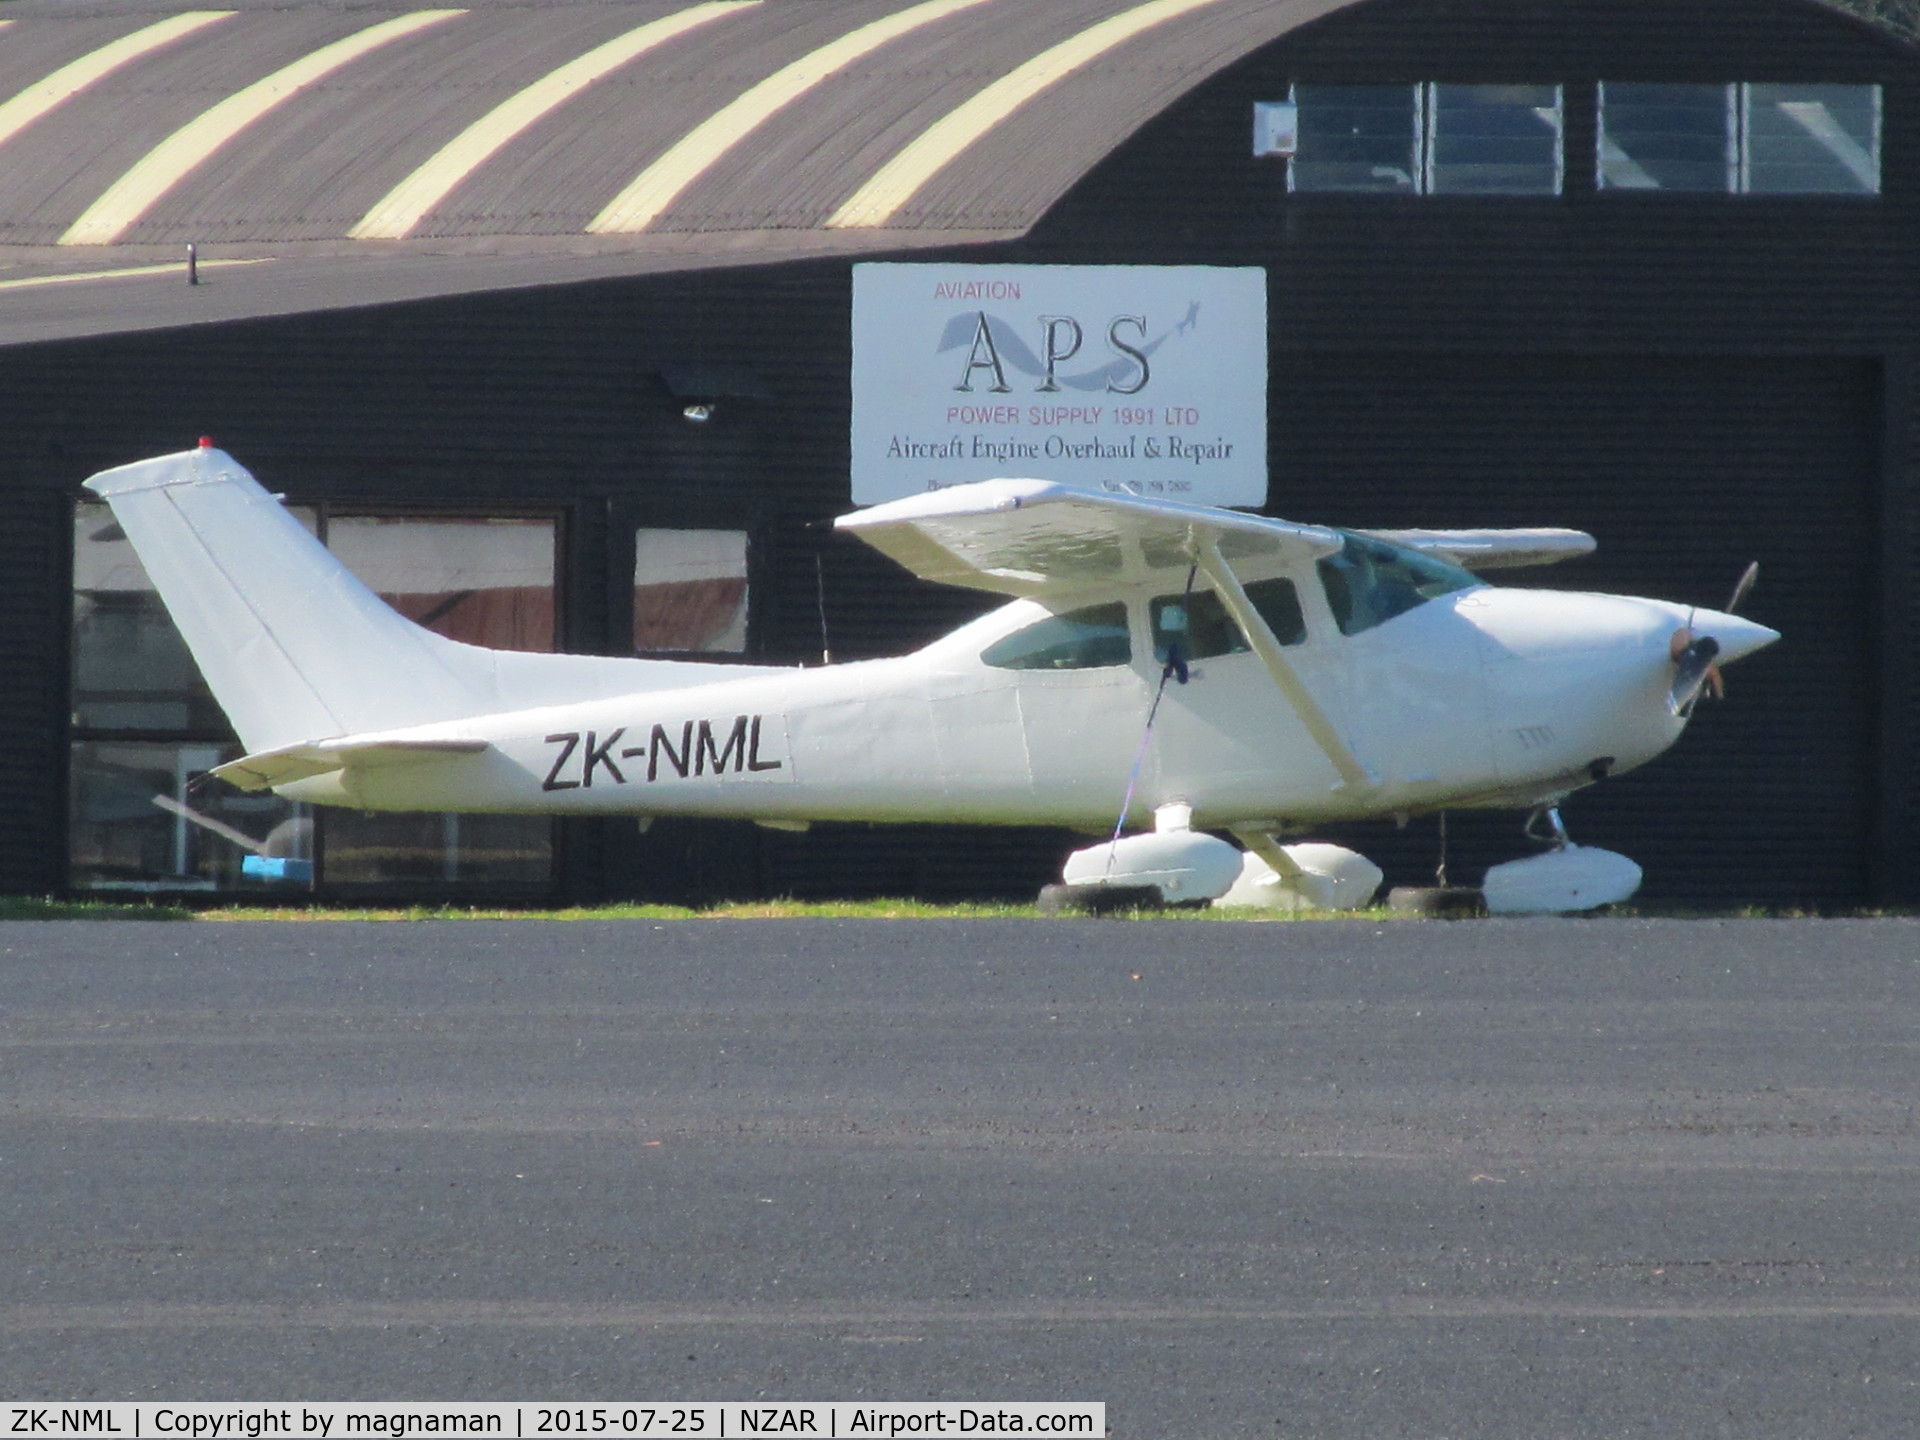 ZK-NML, Cessna 182R Skylane C/N 18267842, new to me at ardmore today